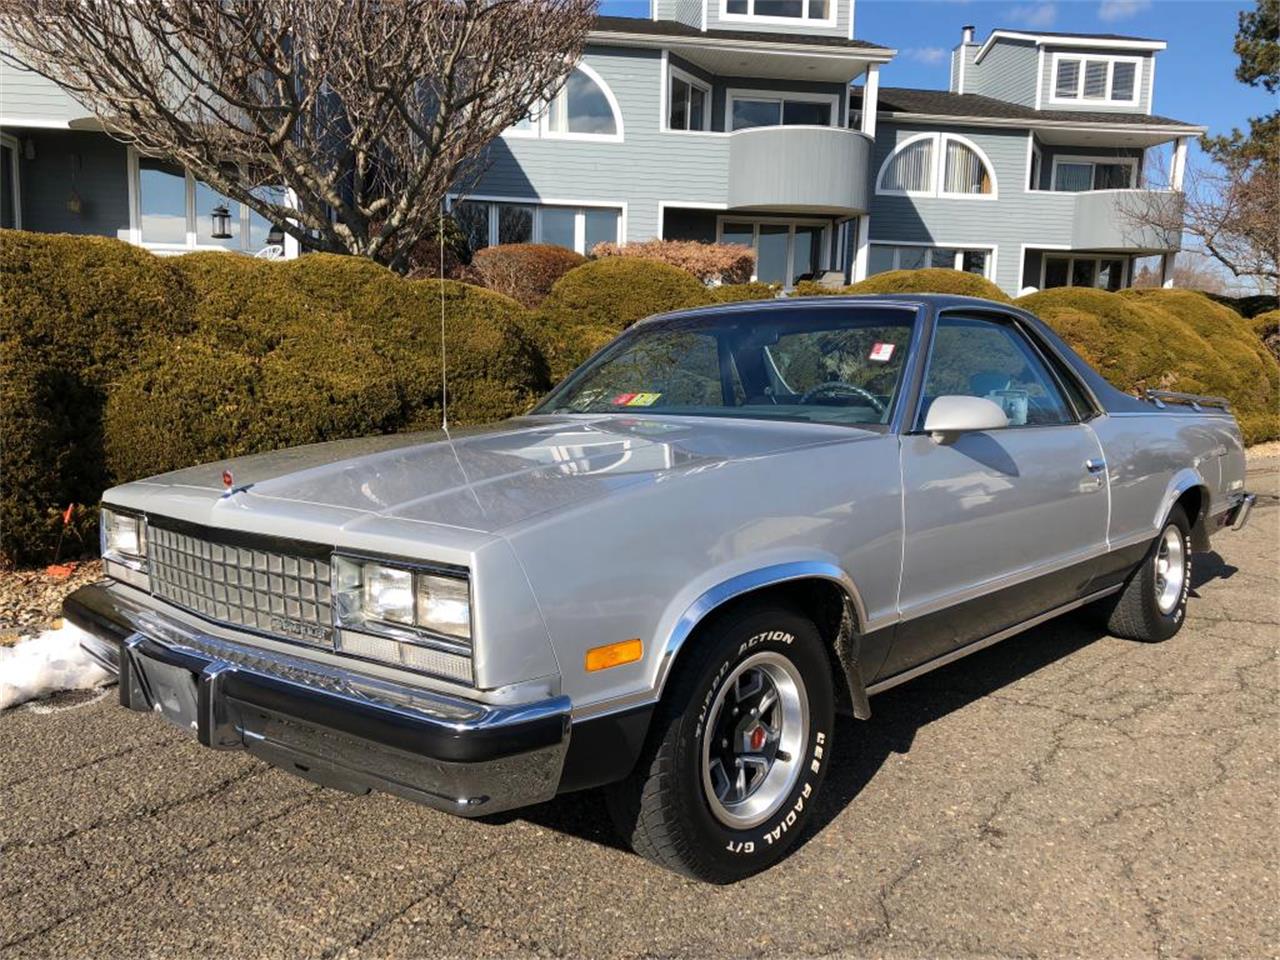 1987 El Camino For Sale - www.inf-inet.com